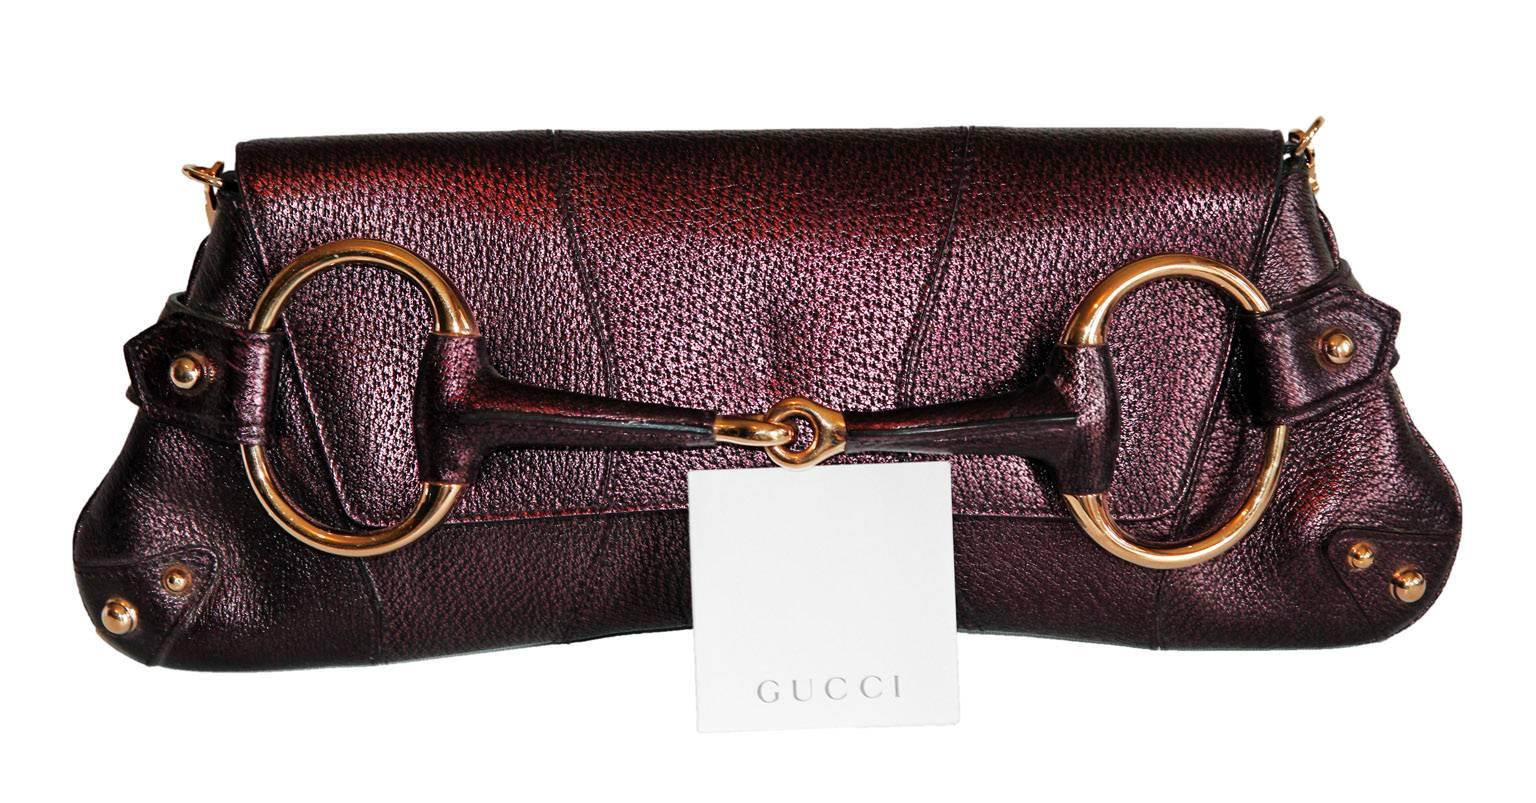 Uber-Rare Tom Ford Gucci Fall Winter 2004  Metallic Aubergine Leather Horsebit Bag!

So many of Tom Ford's incredible runway collections for Gucci & YSL will forever hold a place in fashion history, as well as in people's hearts, for the